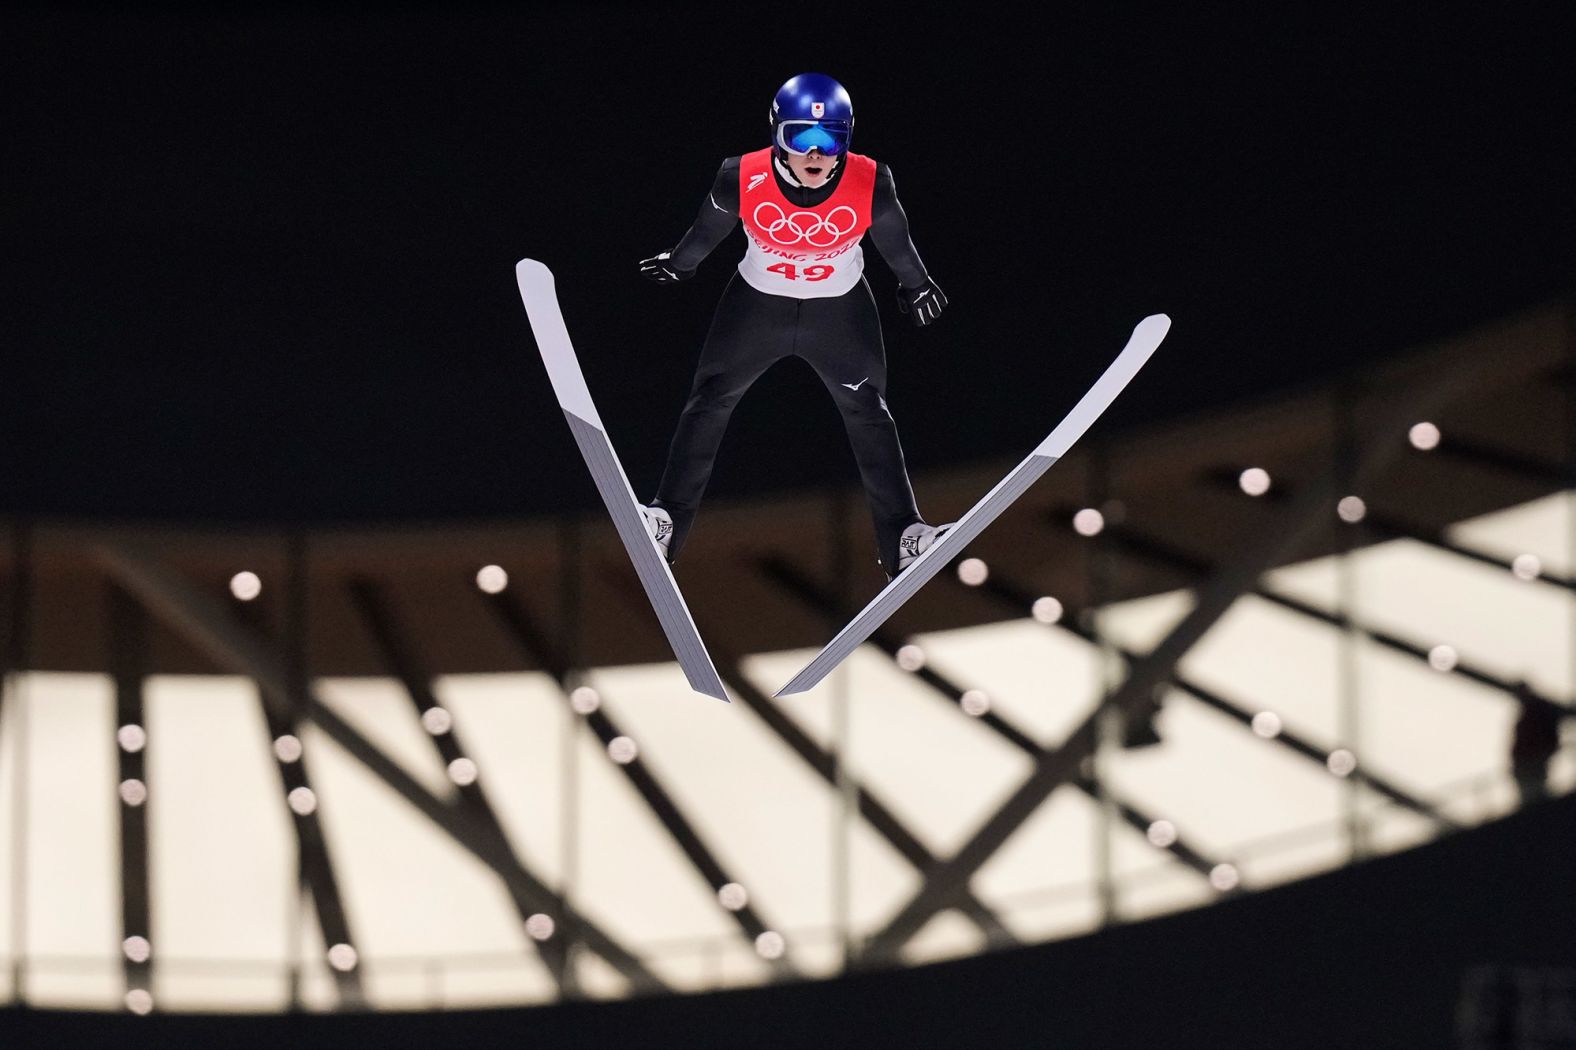 Japan's Ryoyu Kobayashi soars through the air during the normal hill competition on February 6. He became the first ski jumper from his country to <a href="index.php?page=&url=https%3A%2F%2Fwww.cnn.com%2Fworld%2Flive-news%2Fbeijing-winter-olympics-02-06-22-spt%2Fh_784f87e1c39571ad55a836cb1ff5fcb5" target="_blank">win the normal hill event</a> since Yukio Kasaya in 1972.